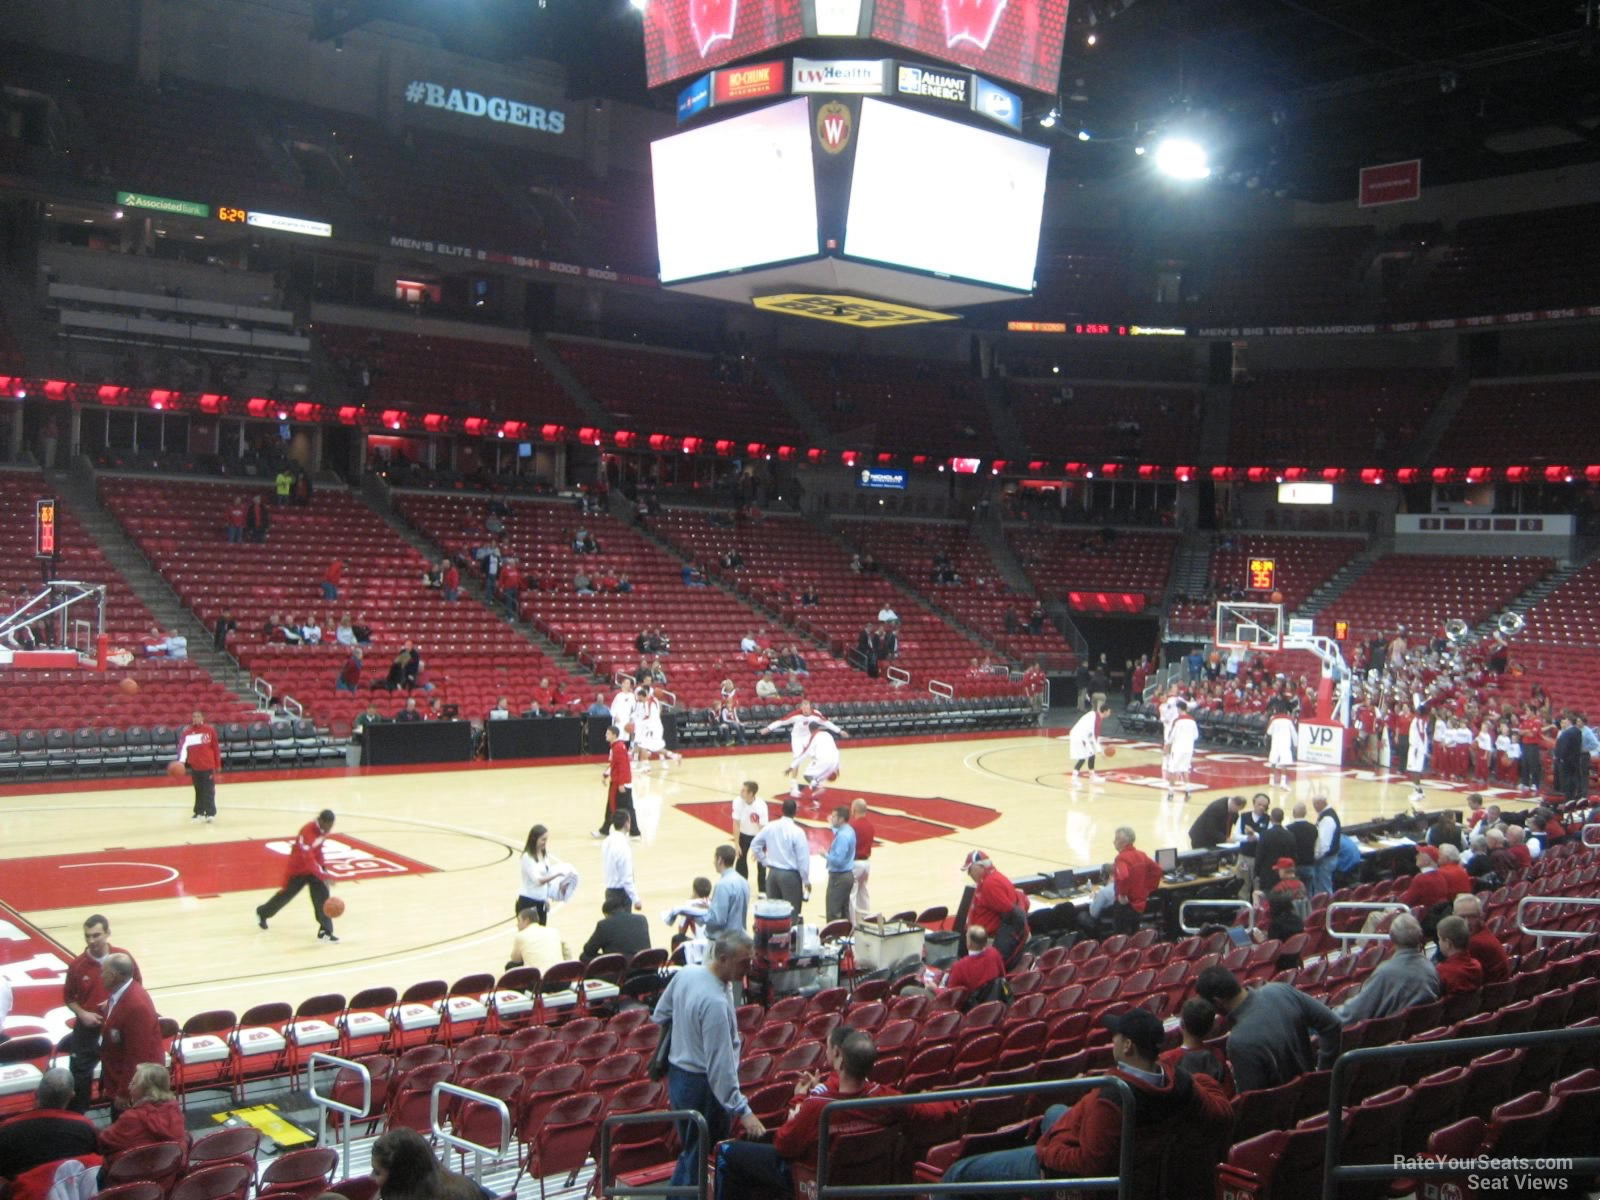 Kohl Center Wi Seating Chart Rows